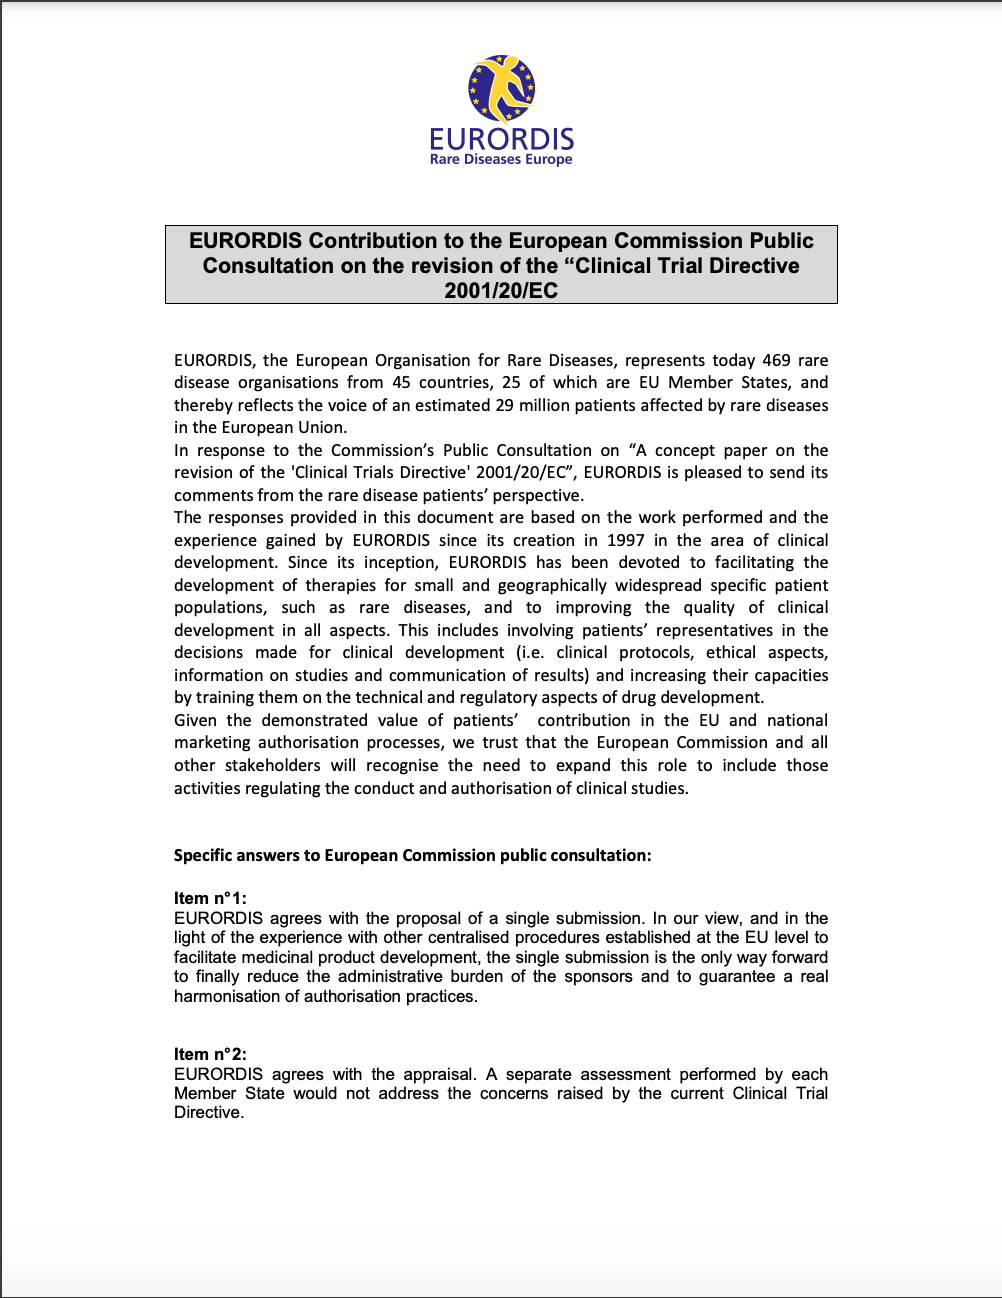 EURORDIS Contribution to the European Commission Public Consultation on the Revision of the “Clinical Trial Directive”